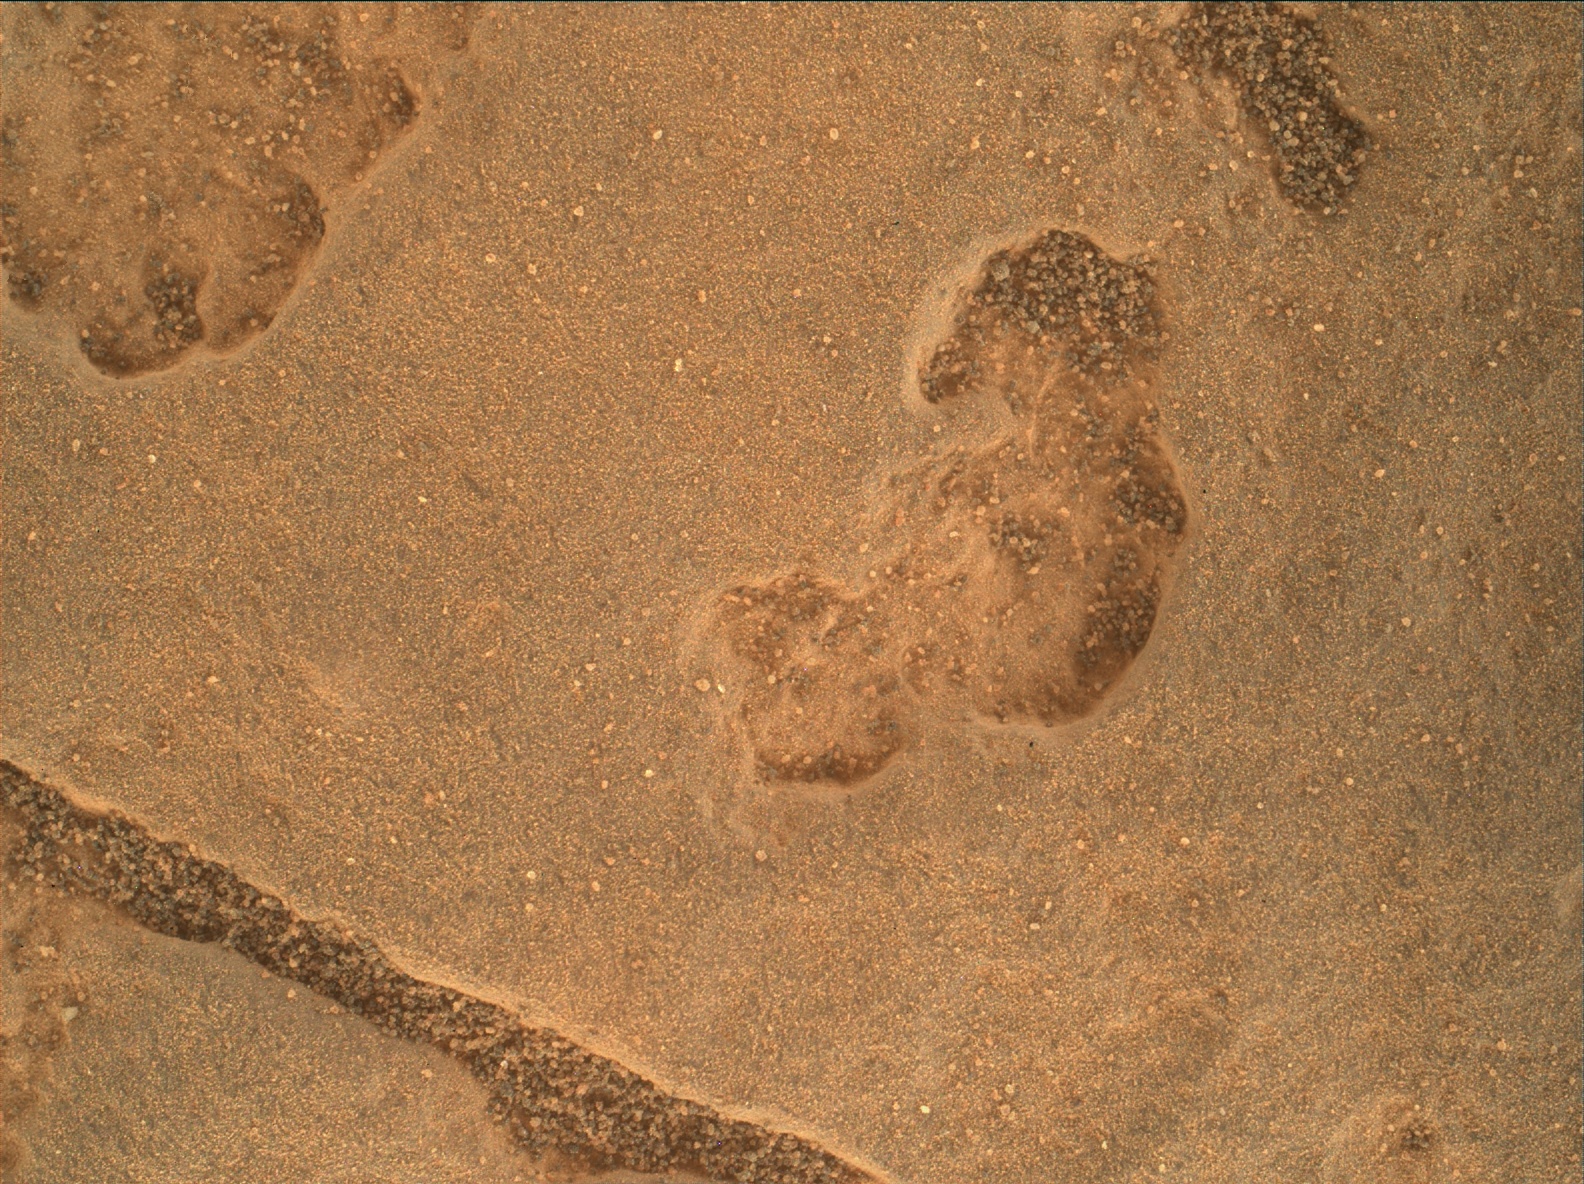 Nasa's Mars rover Curiosity acquired this image using its Mars Hand Lens Imager (MAHLI) on Sol 1727